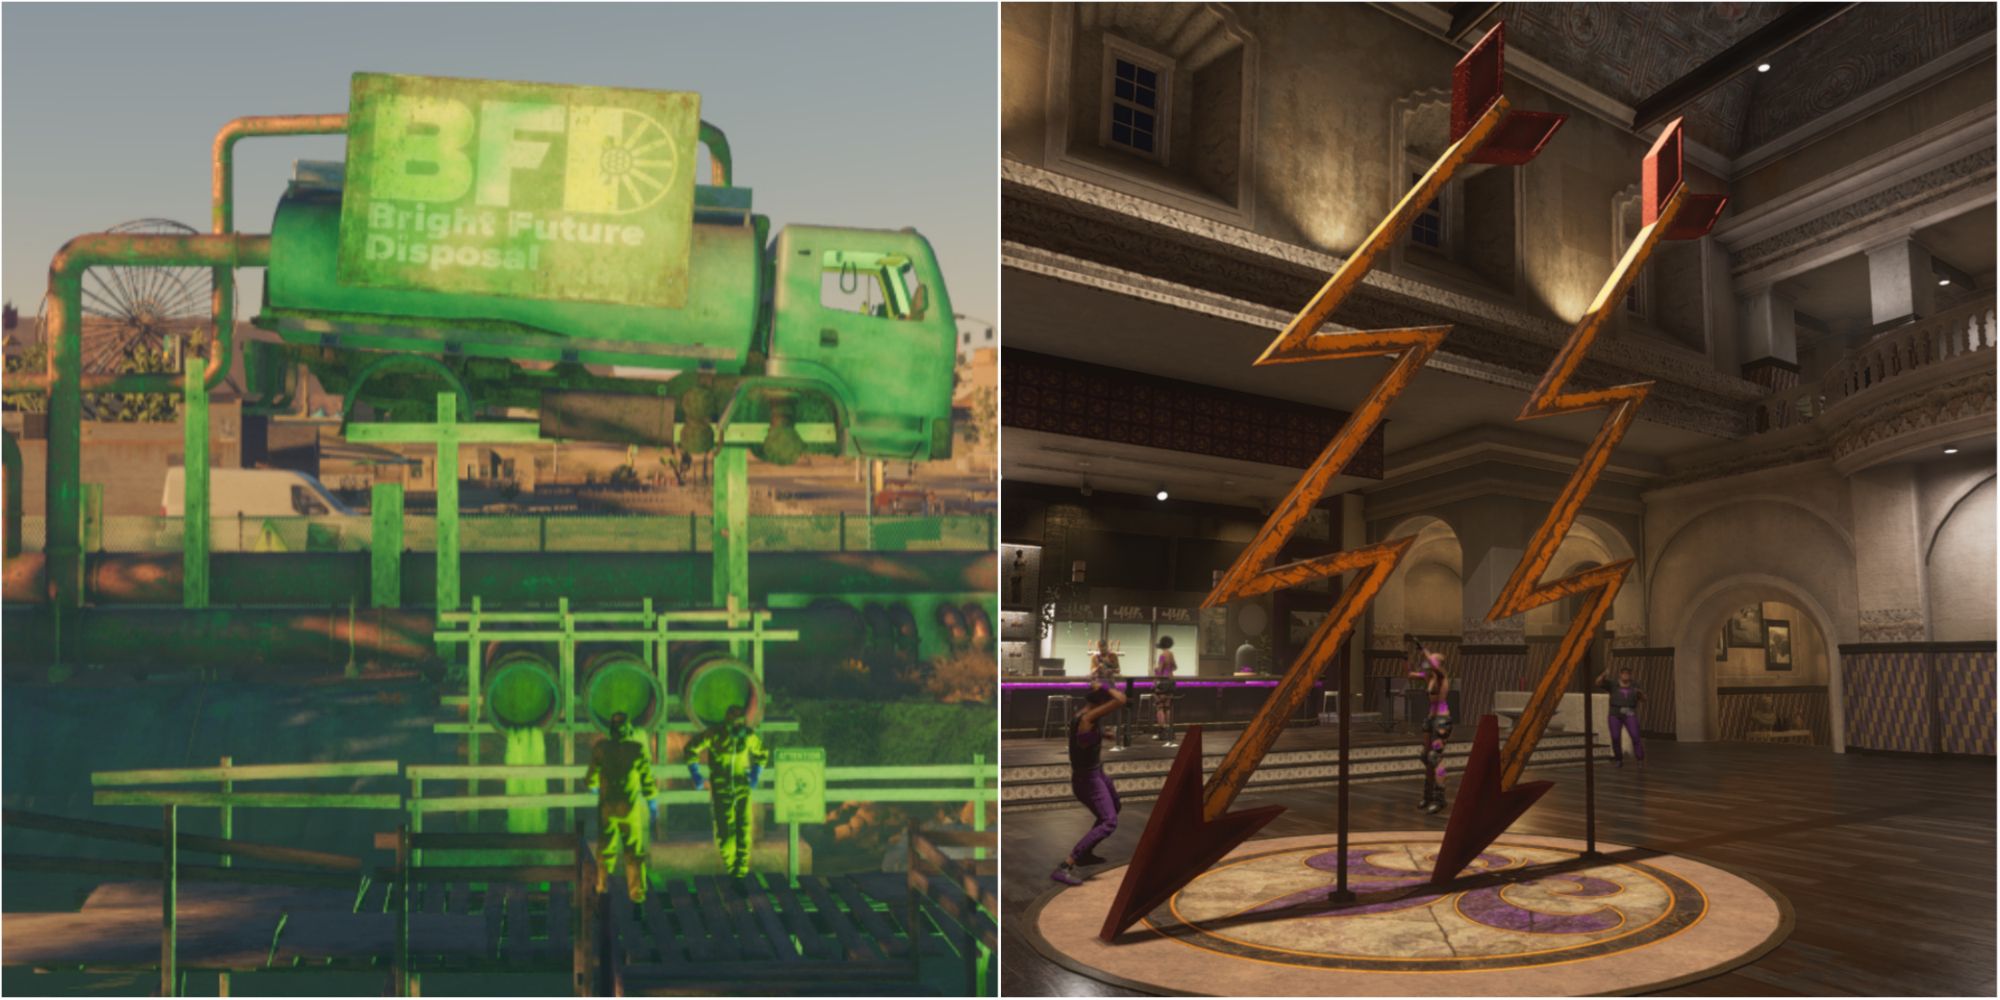 Saints Row Things To Do After The Game Featured Split Image Bright Futures and Collectible